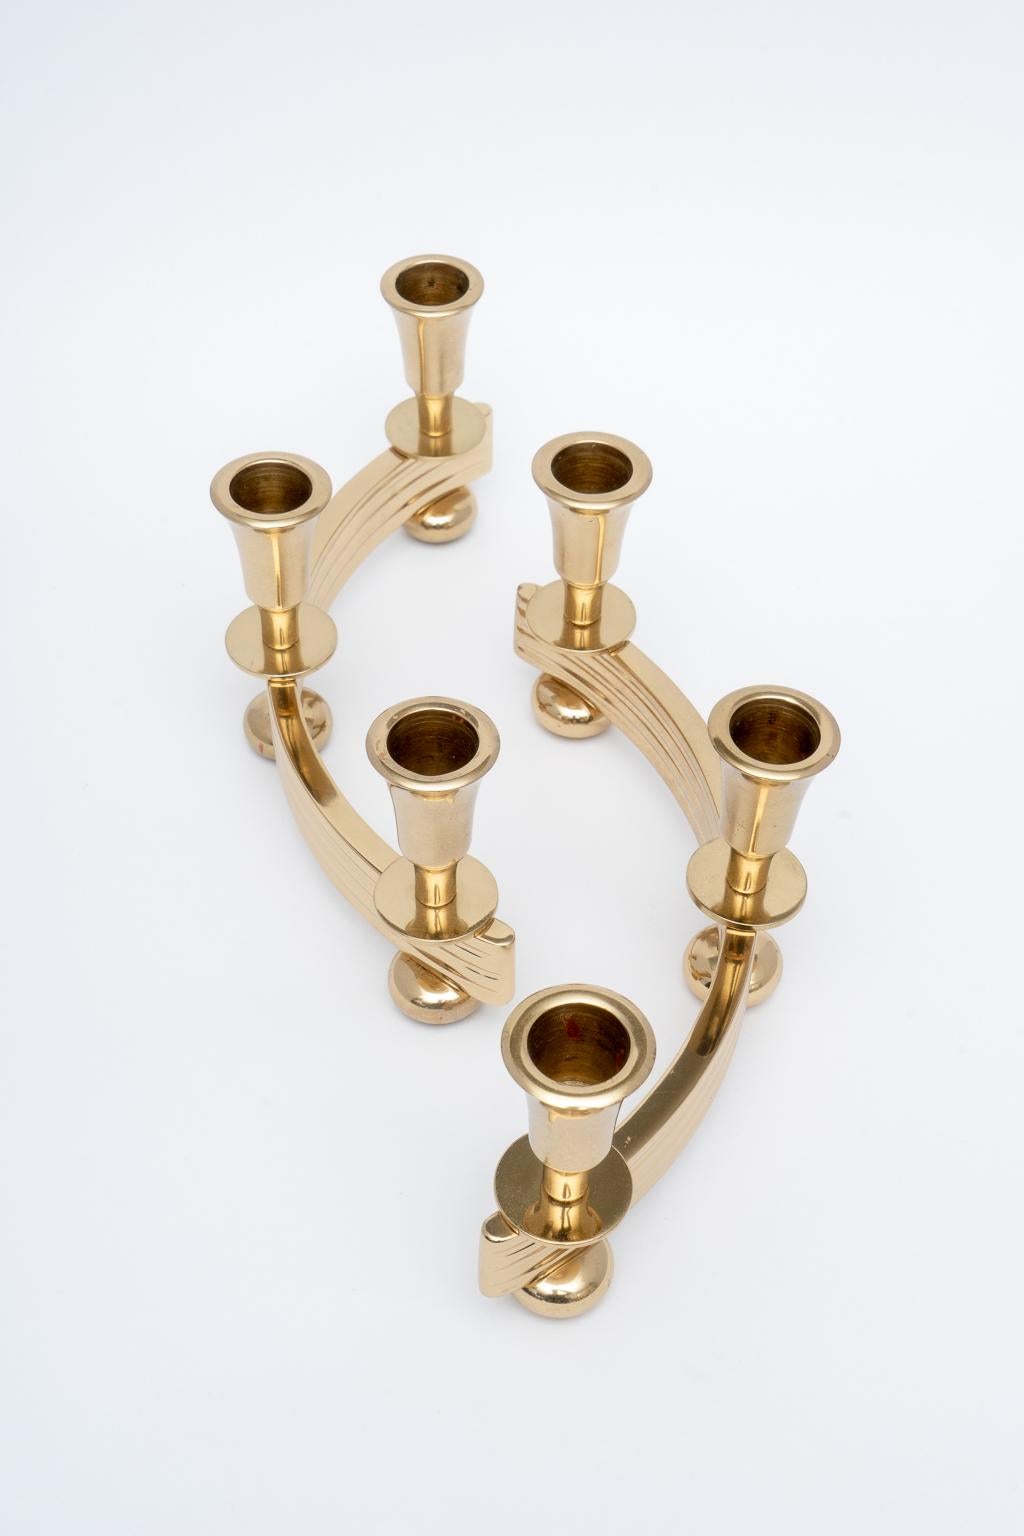 This stylish set of brass Art Deco style candle holders date to the 1930s-1940s and were fabricated by the Dirilyte company. They have been professionally polished and lacquered, and thus no tarnishing.